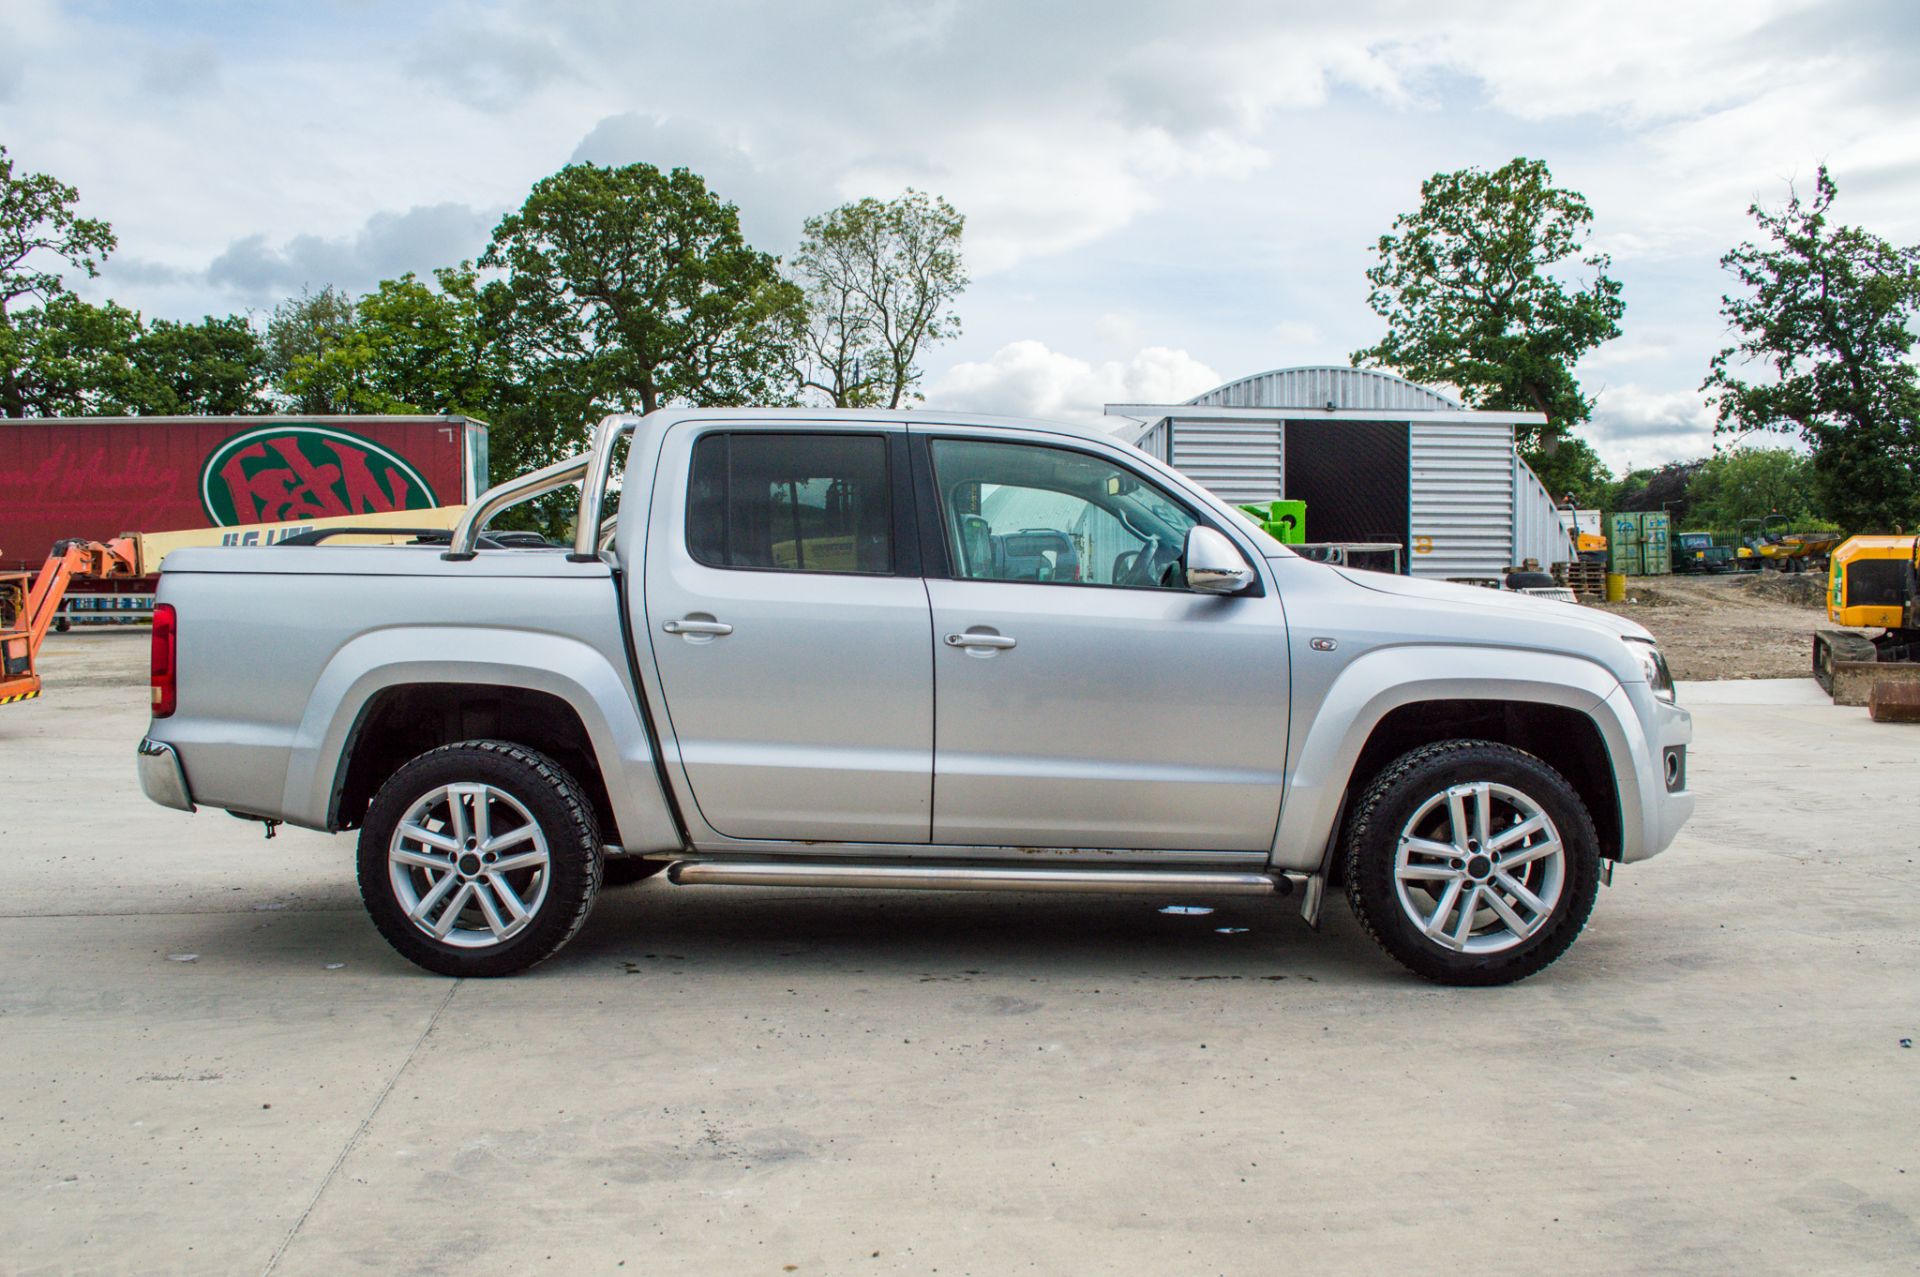 Volkswagen Amarok 2.0 TDI highline 4wd automatic double cab pick up Reg No: PE63 EYH Date of - Image 8 of 30